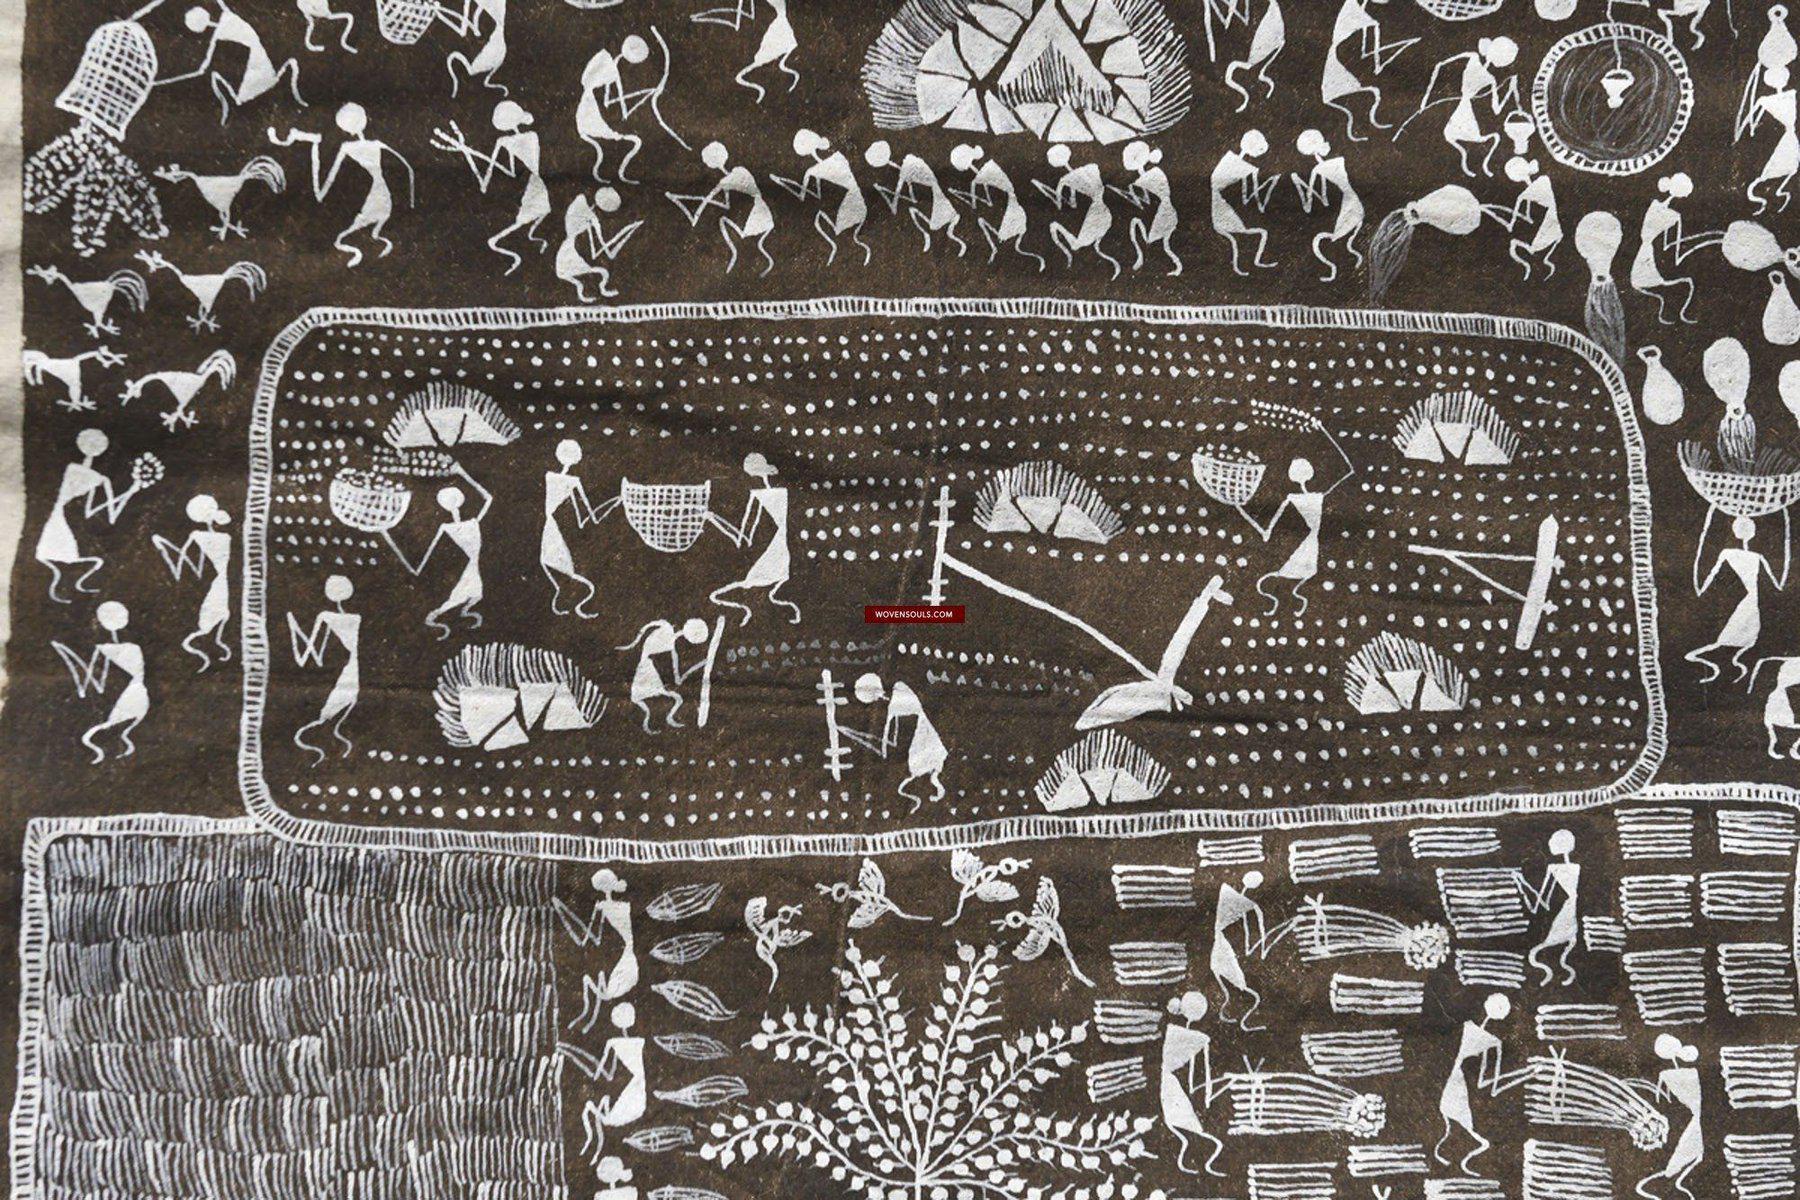 142 SOLD Warli Tribal Painting on Cow Dung Base-WOVENSOULS-Antique-Vintage-Textiles-Art-Decor